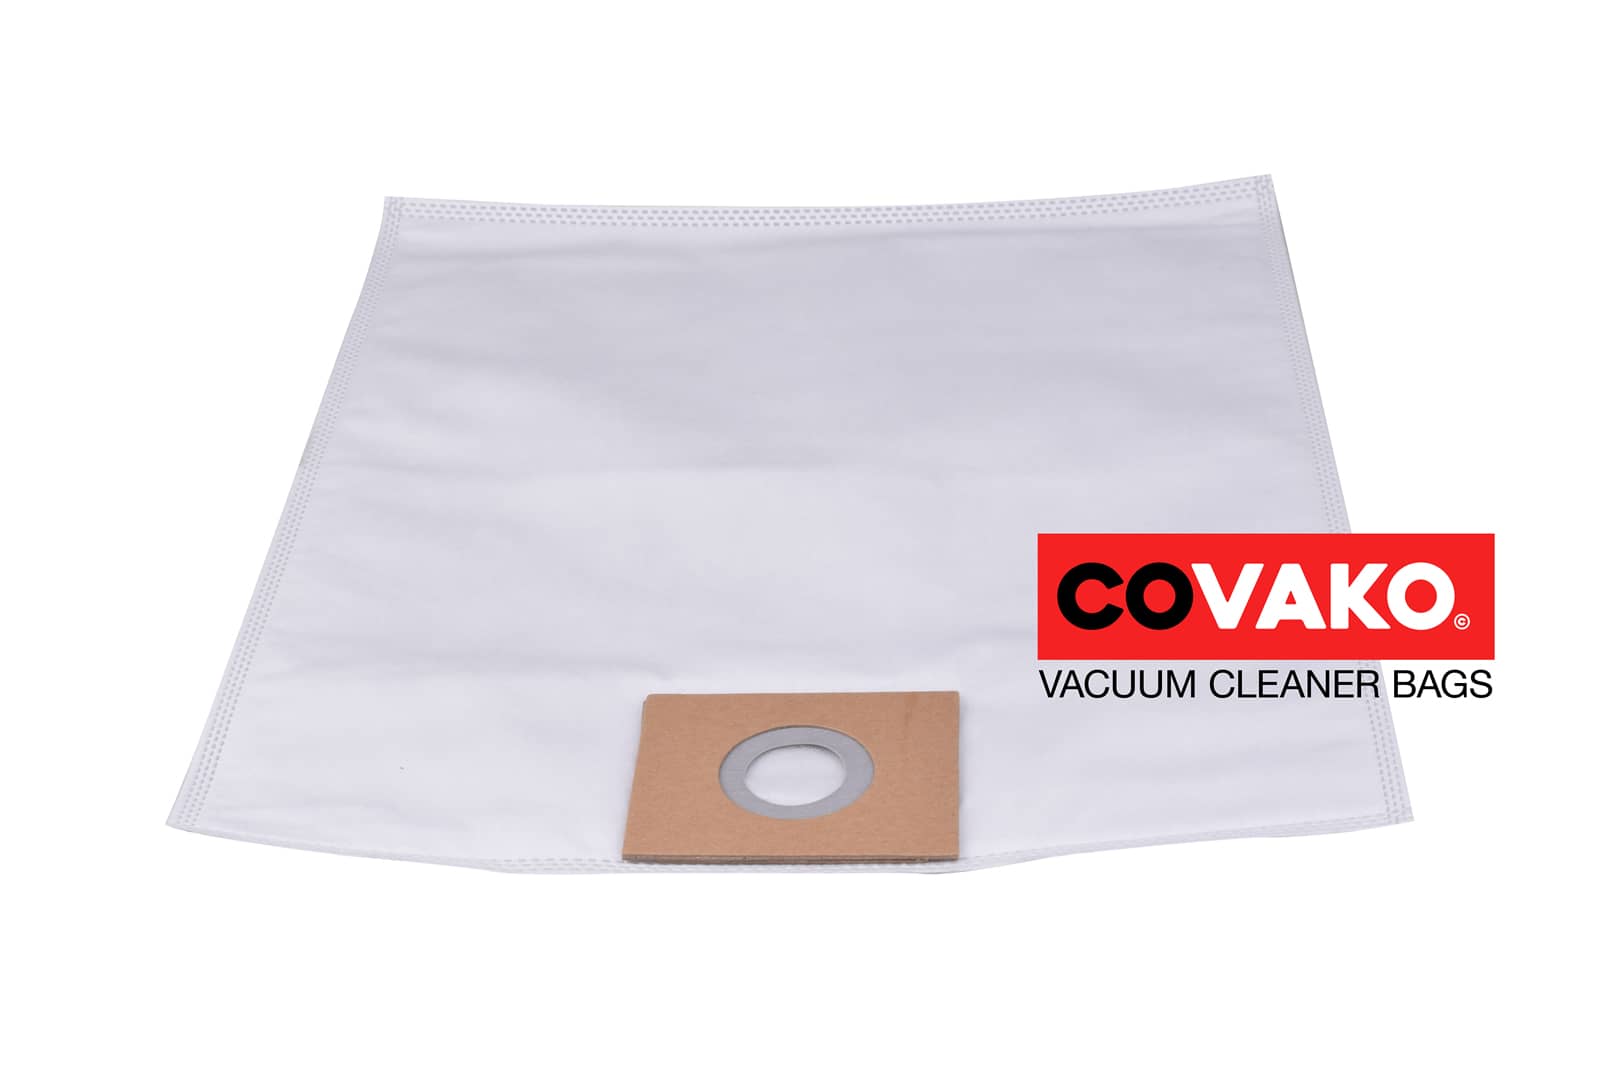 I-vac Eco-Dryver / Synthesis - I-vac vacuum cleaner bags